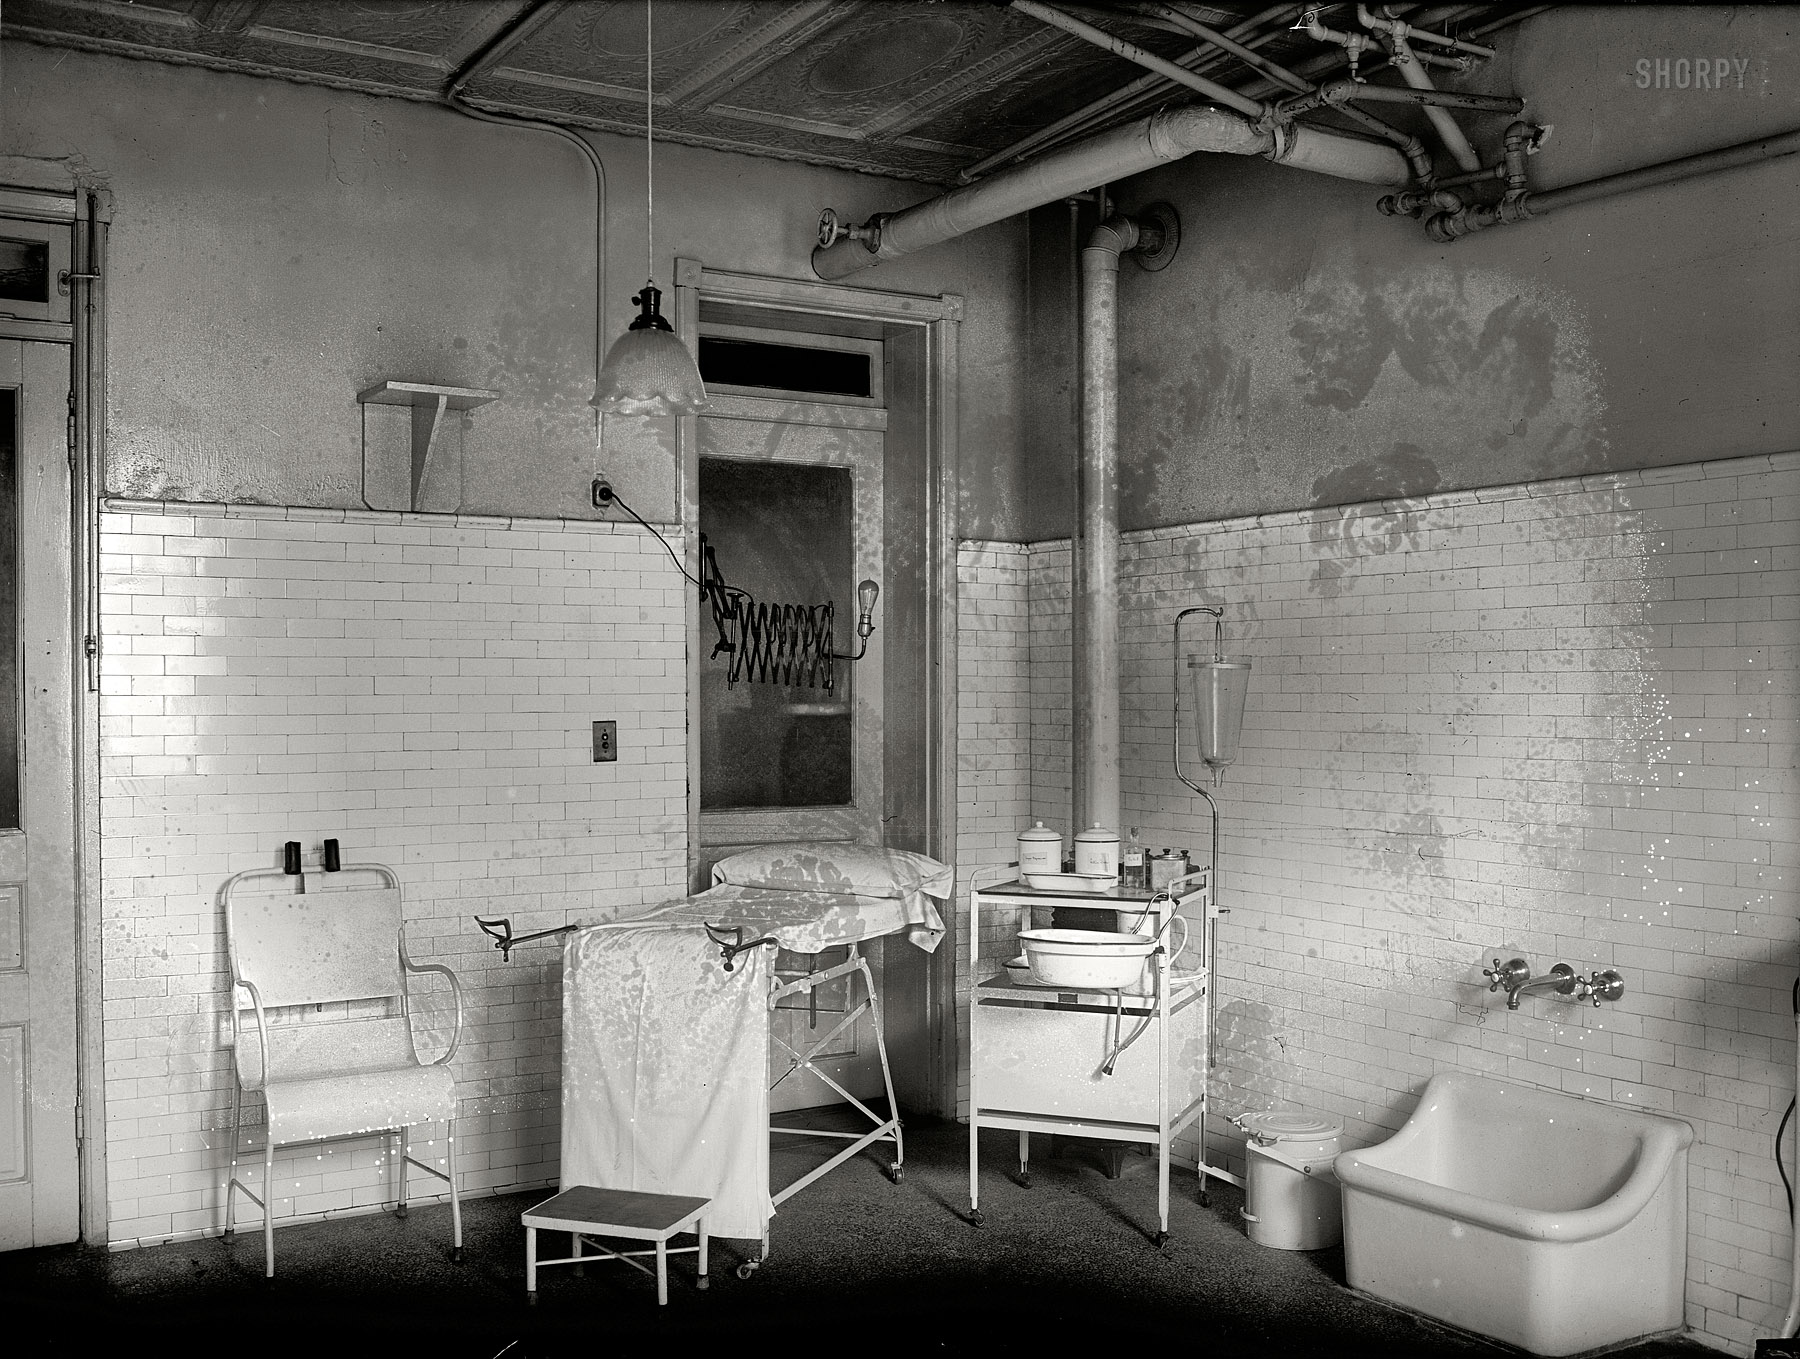 Washington, D.C., 1922. "Social Hygiene exhibit. House of Detention, Women's Bureau. Clinic -- Mental and medical examinations are essential in order to make intelligent disposition of cases." National Photo glass negative. View full size.